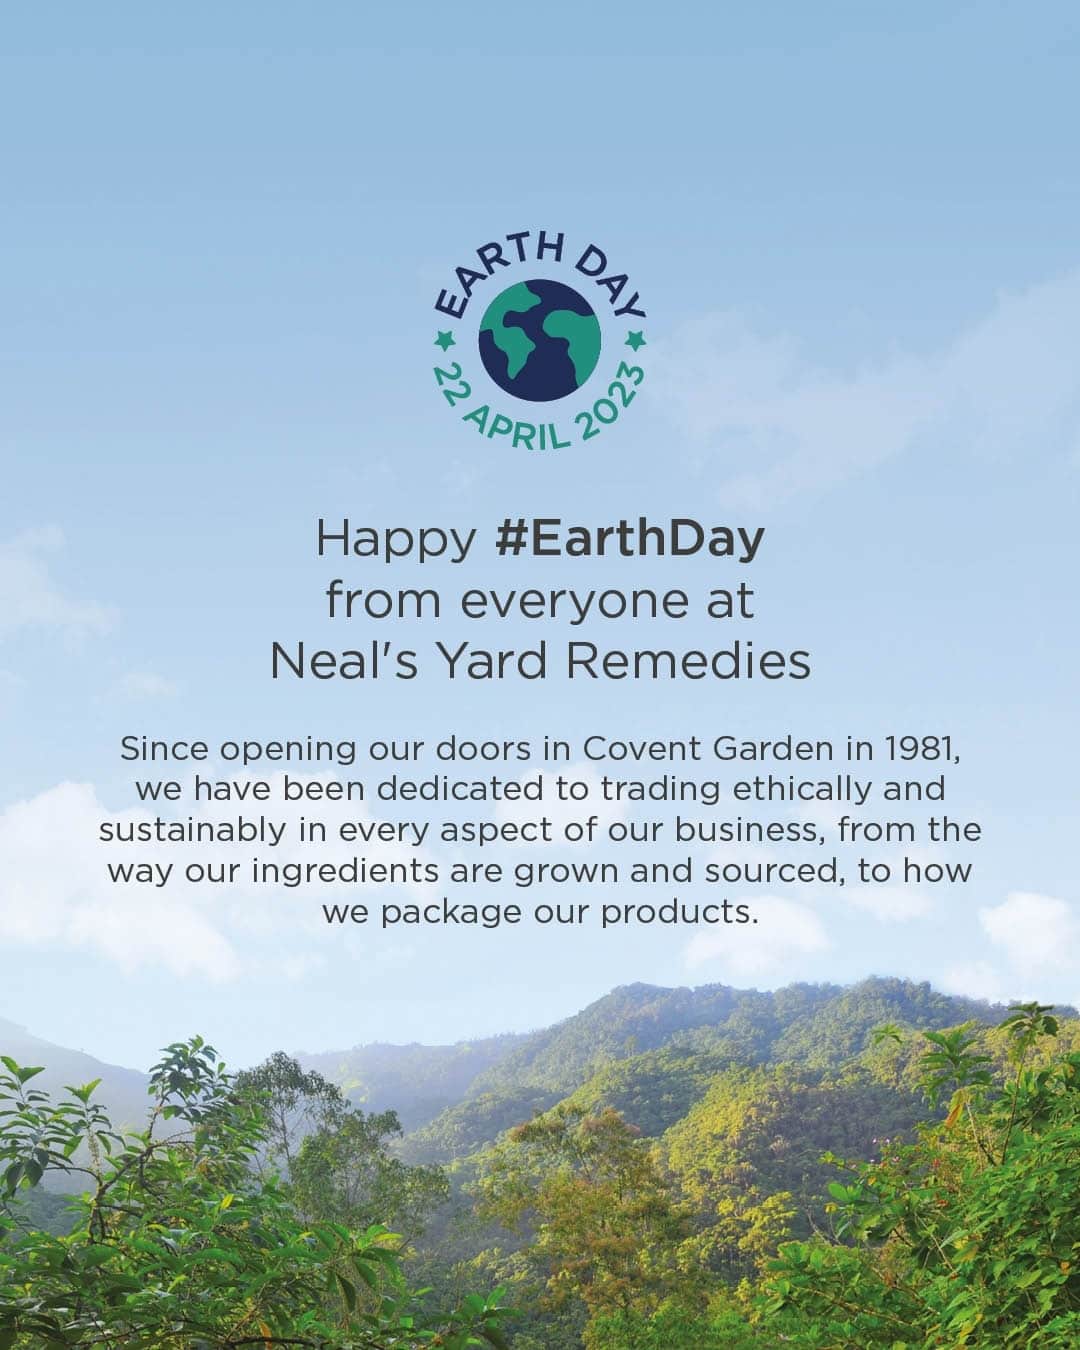 Neal's Yard Remediesのインスタグラム：「Happy #EarthDay from everyone at Neal's Yard Remedies 🌎💙 ⁠ ⁠ Swipe to see what we're working on to make sure we tread lightly on our planet.⁠ ⁠ Since opening our doors in Covent Garden in 1981, we have been dedicated to trading ethically and sustainably in every aspect of our business, from the way our ingredients are grown and sourced, to how we package our products.⁠ ⁠ Here are just some of the steps we take for making a change....⁠ 🌎This year marks our 15th anniversary of being certified CarbonNeutral®⁠ ✨Over 90% of our ingredients are certified organic by the Soil Association⁠ 🐰None of our products have been tested on animals, and they never will be ⁠ 🐝 We've raised over £300,000 for bee-friendly charities since 2011⁠ ✨All our plastic bottles up to 200ml are made from 100% recycled plastic⁠ 🌲 We’ve prevented the loss of over 3,000,000m² of endangered forest⁠ ✨We've never used plastic microbeads in our products⁠ ♻ We use recycled plastic in our product packaging wherever possible⁠ ⁠ How are you celebrating the world this #EarthDay? Comment below...⁠ ⁠ ⁠」